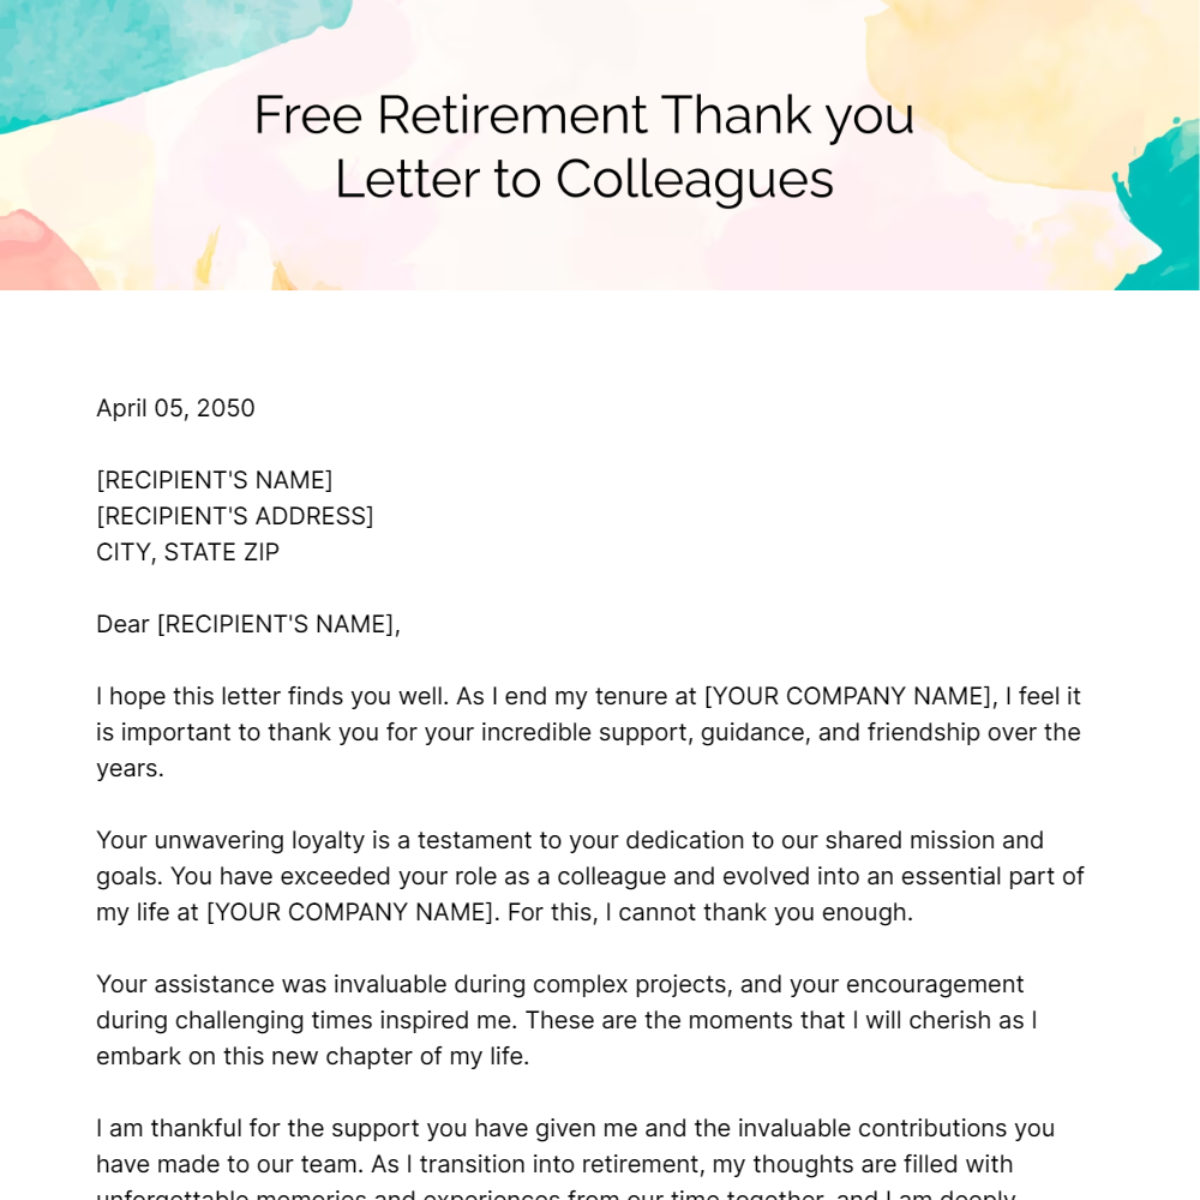 Retirement Thank you Letter to Colleagues Template